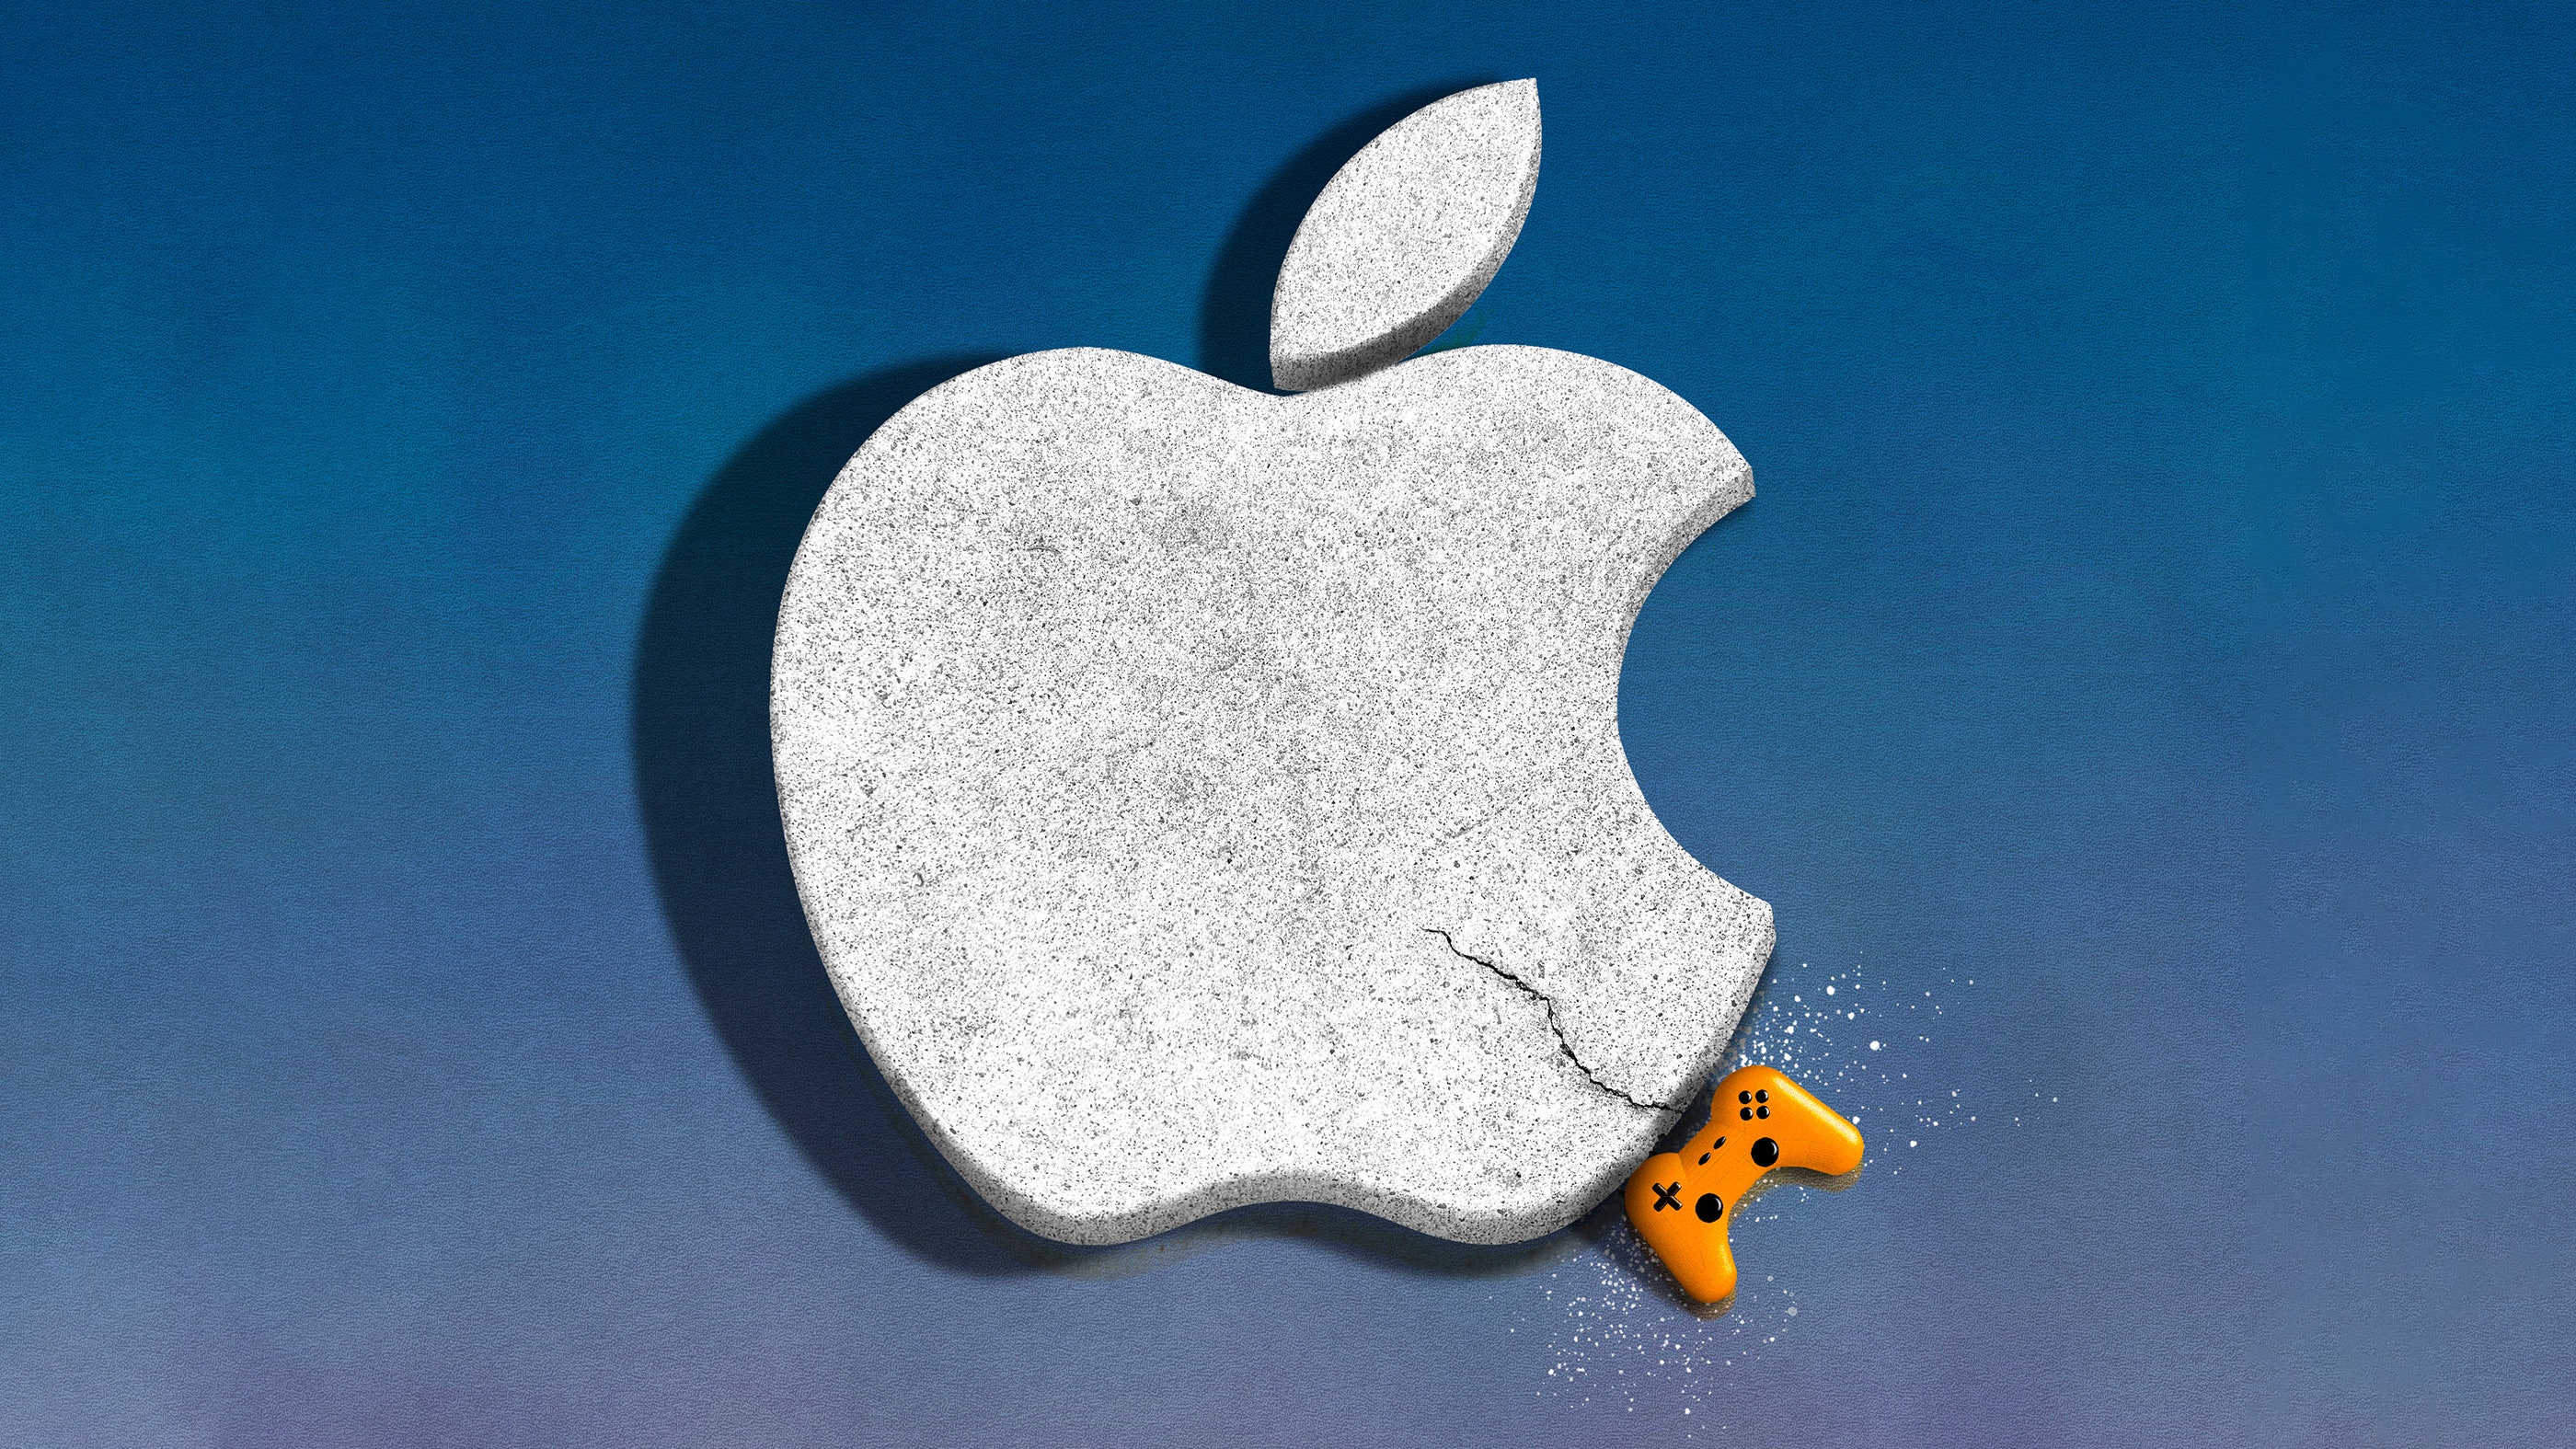 How Epic Games Made a Dent in Apple's App Store Domination